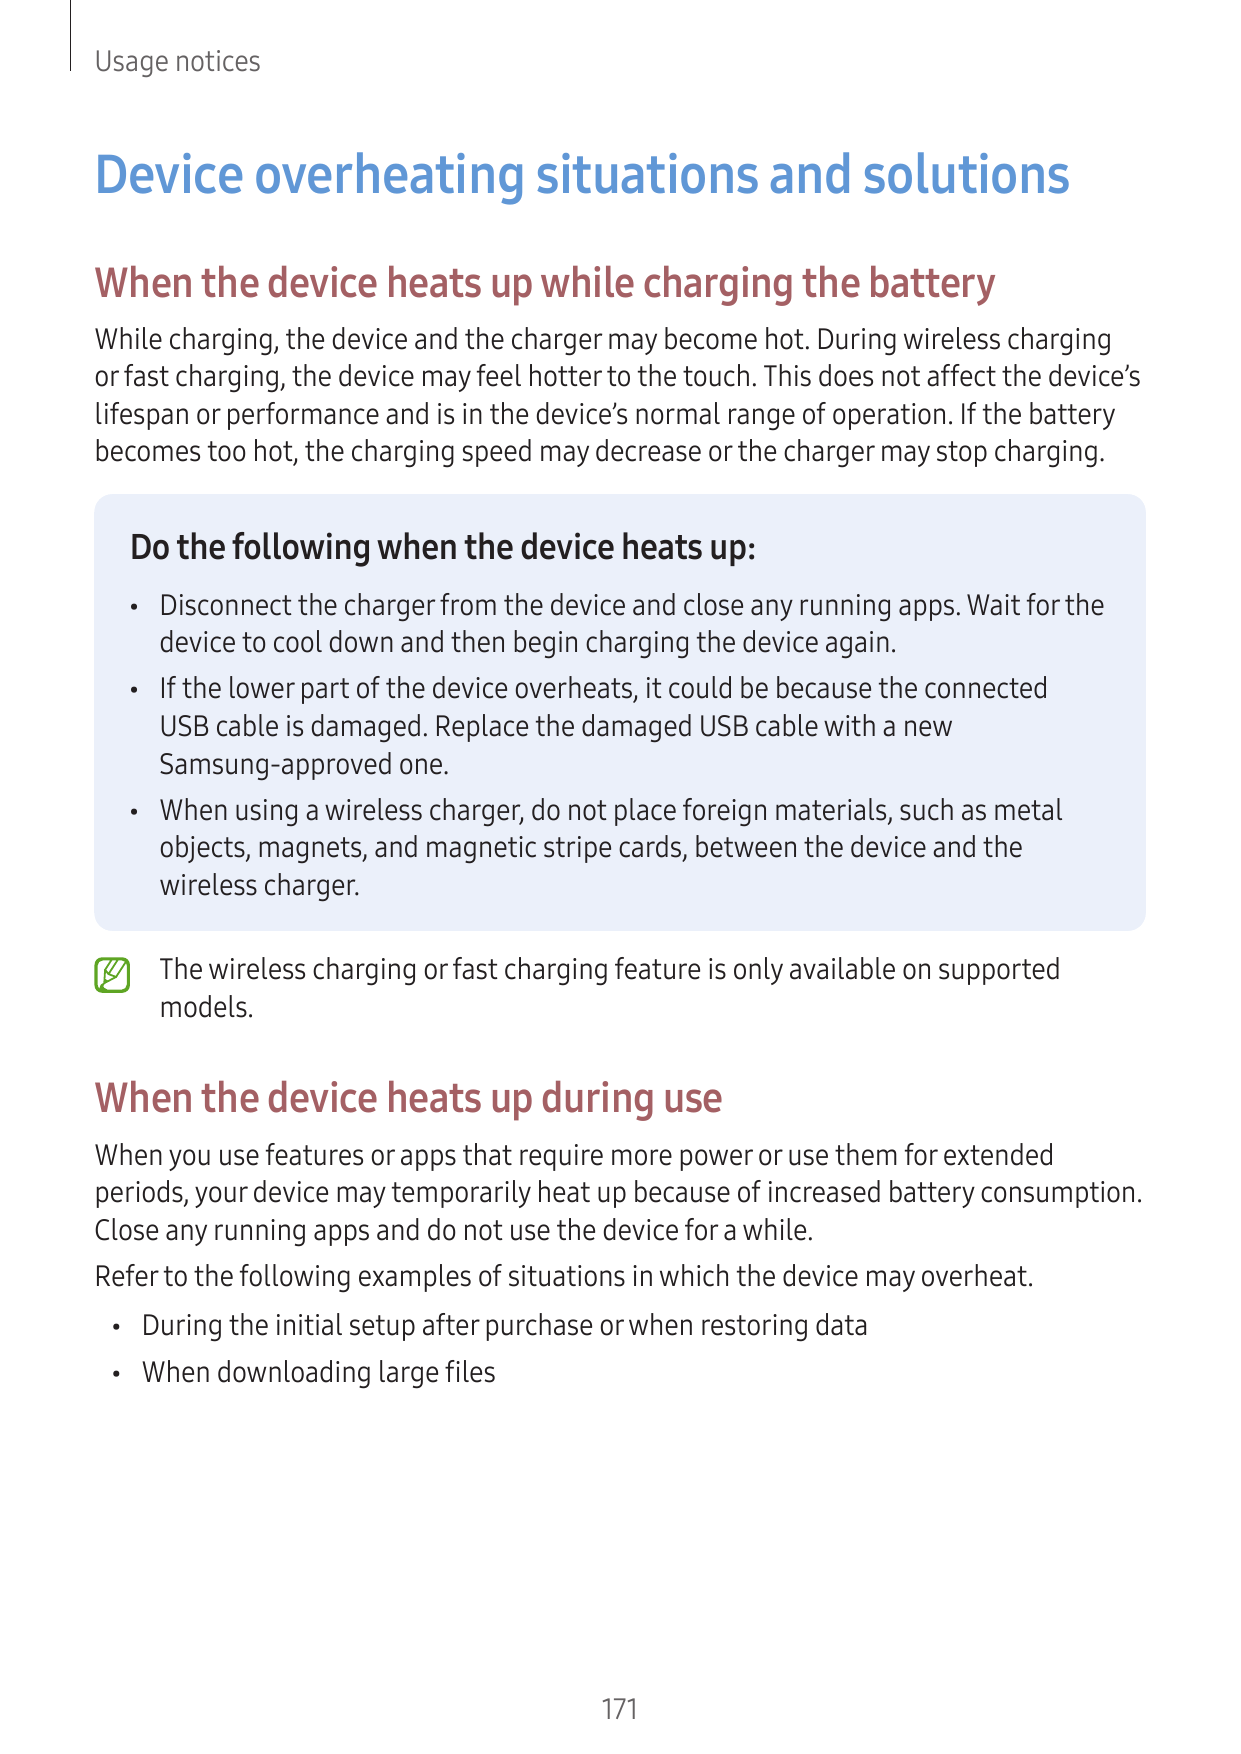 Usage noticesDevice overheating situations and solutionsWhen the device heats up while charging the batteryWhile charging, the d